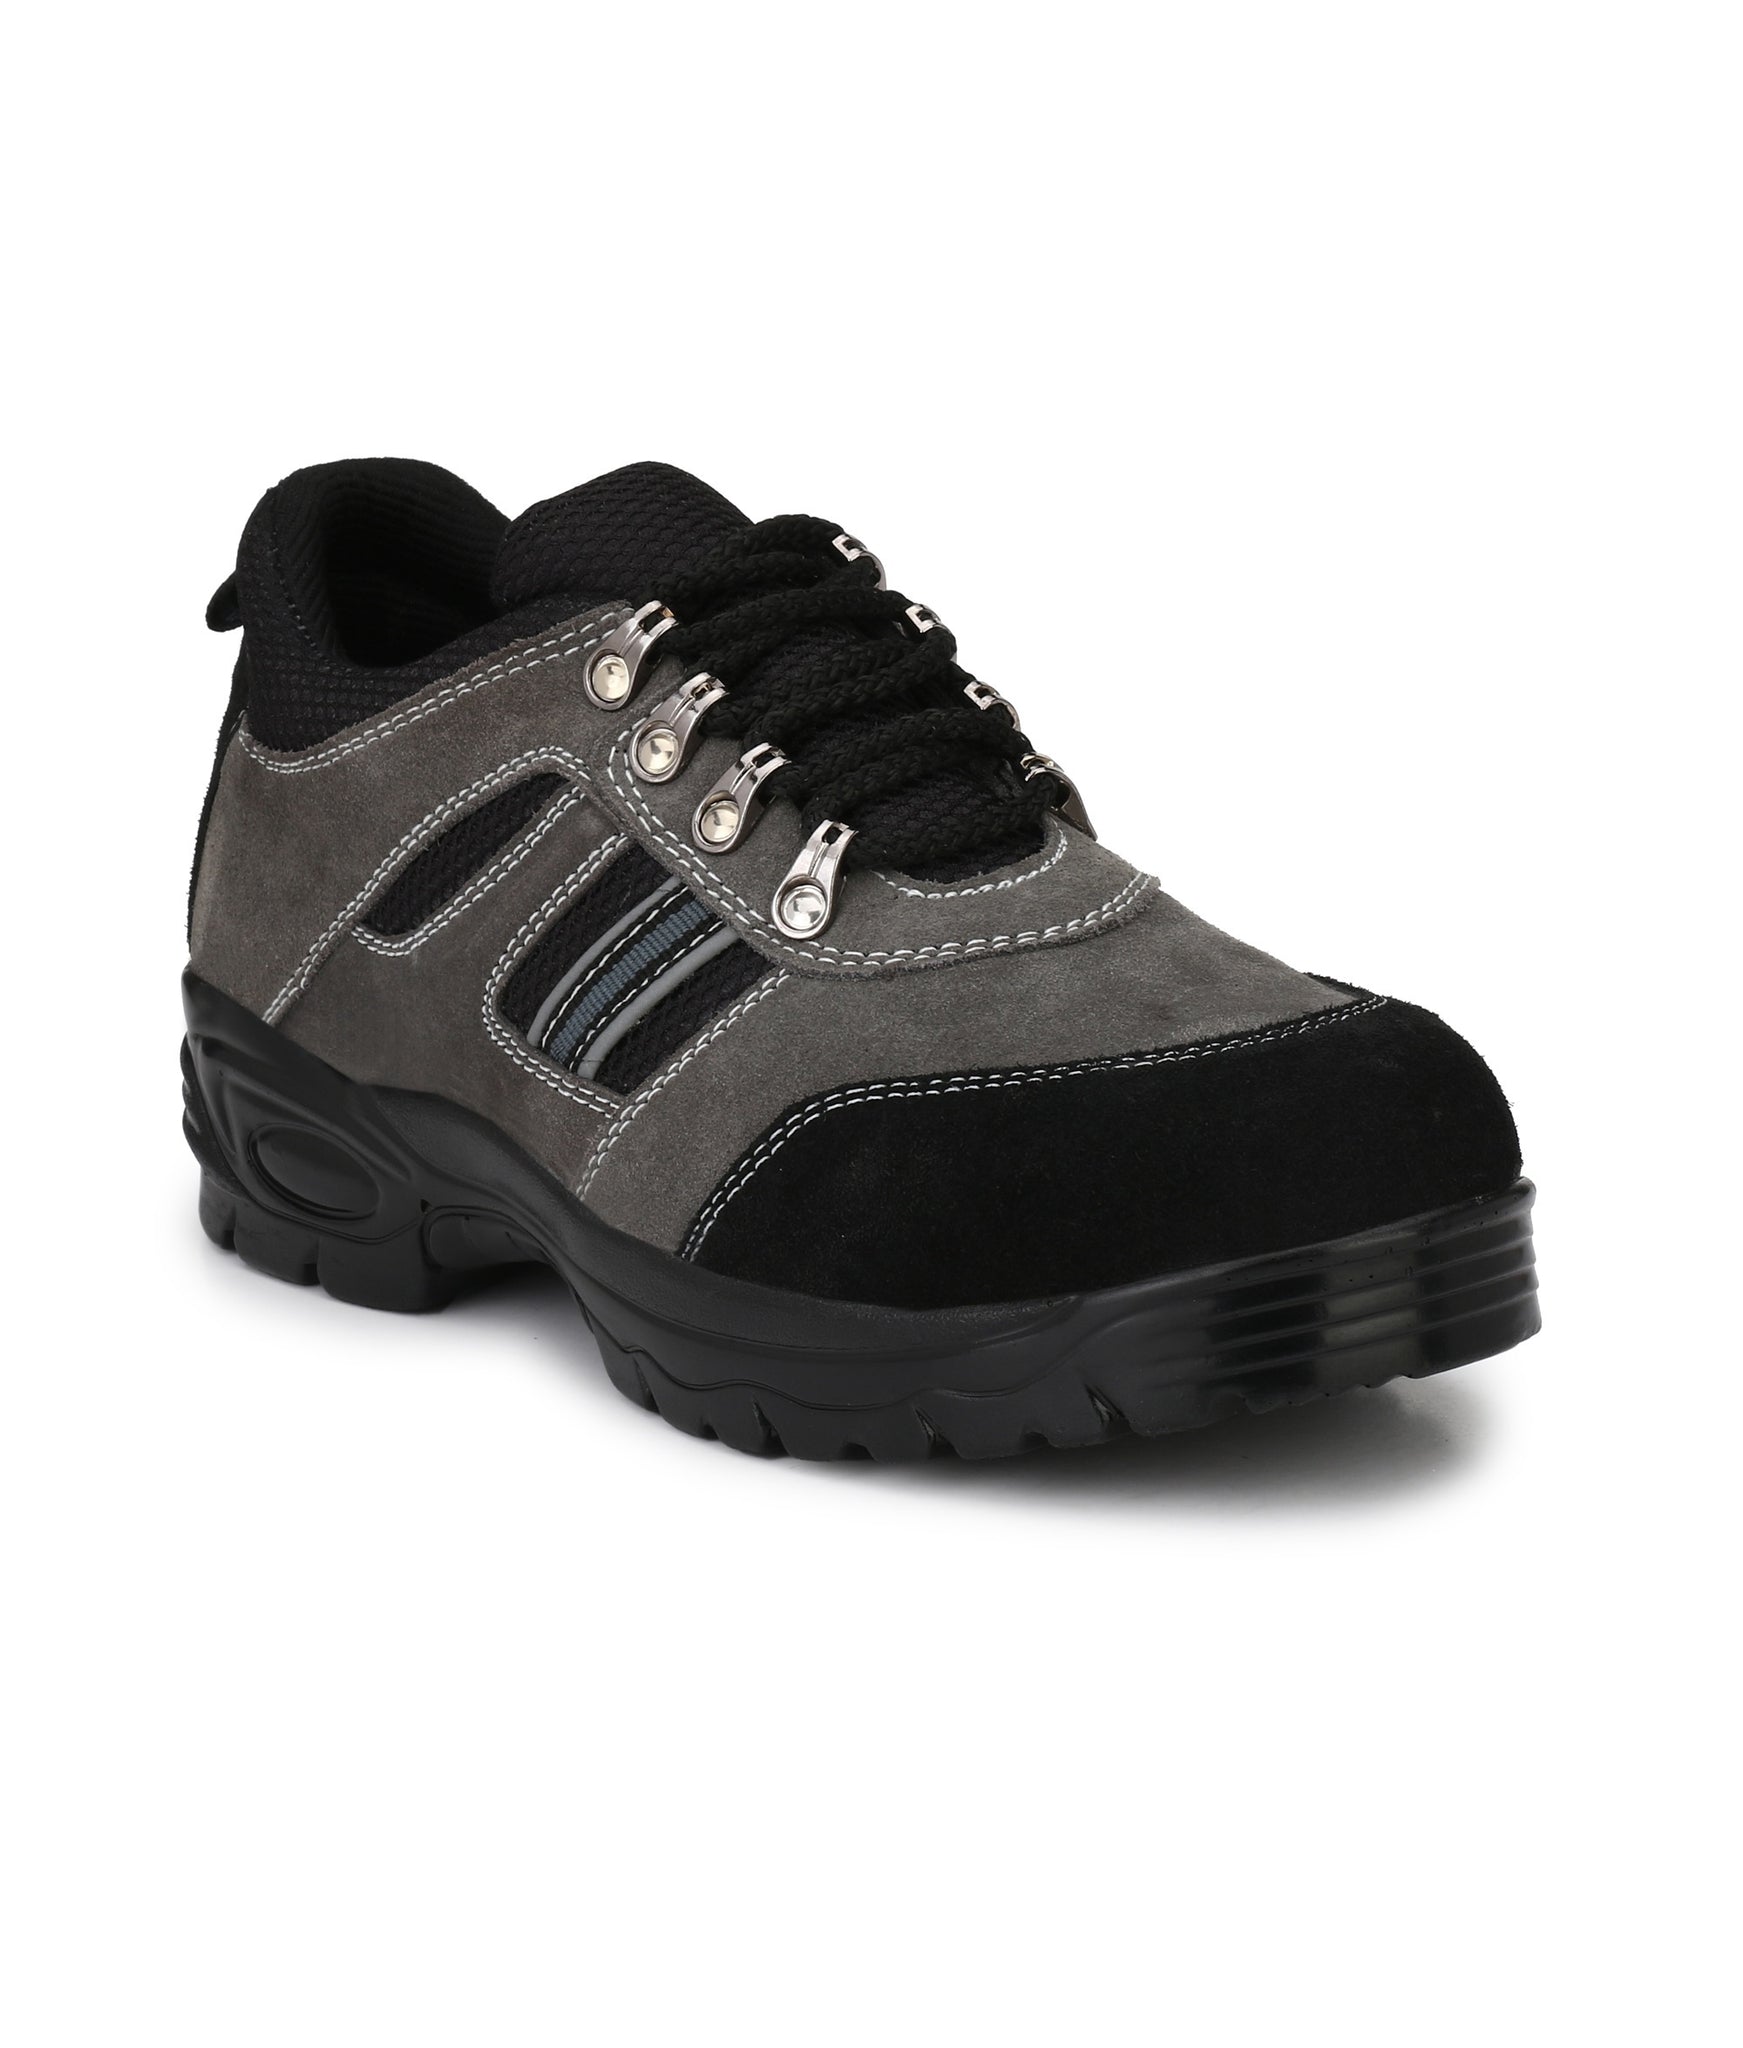 Kavacha Suede Leather Steel Toe Safety Shoe R 502 Grey PU Sole